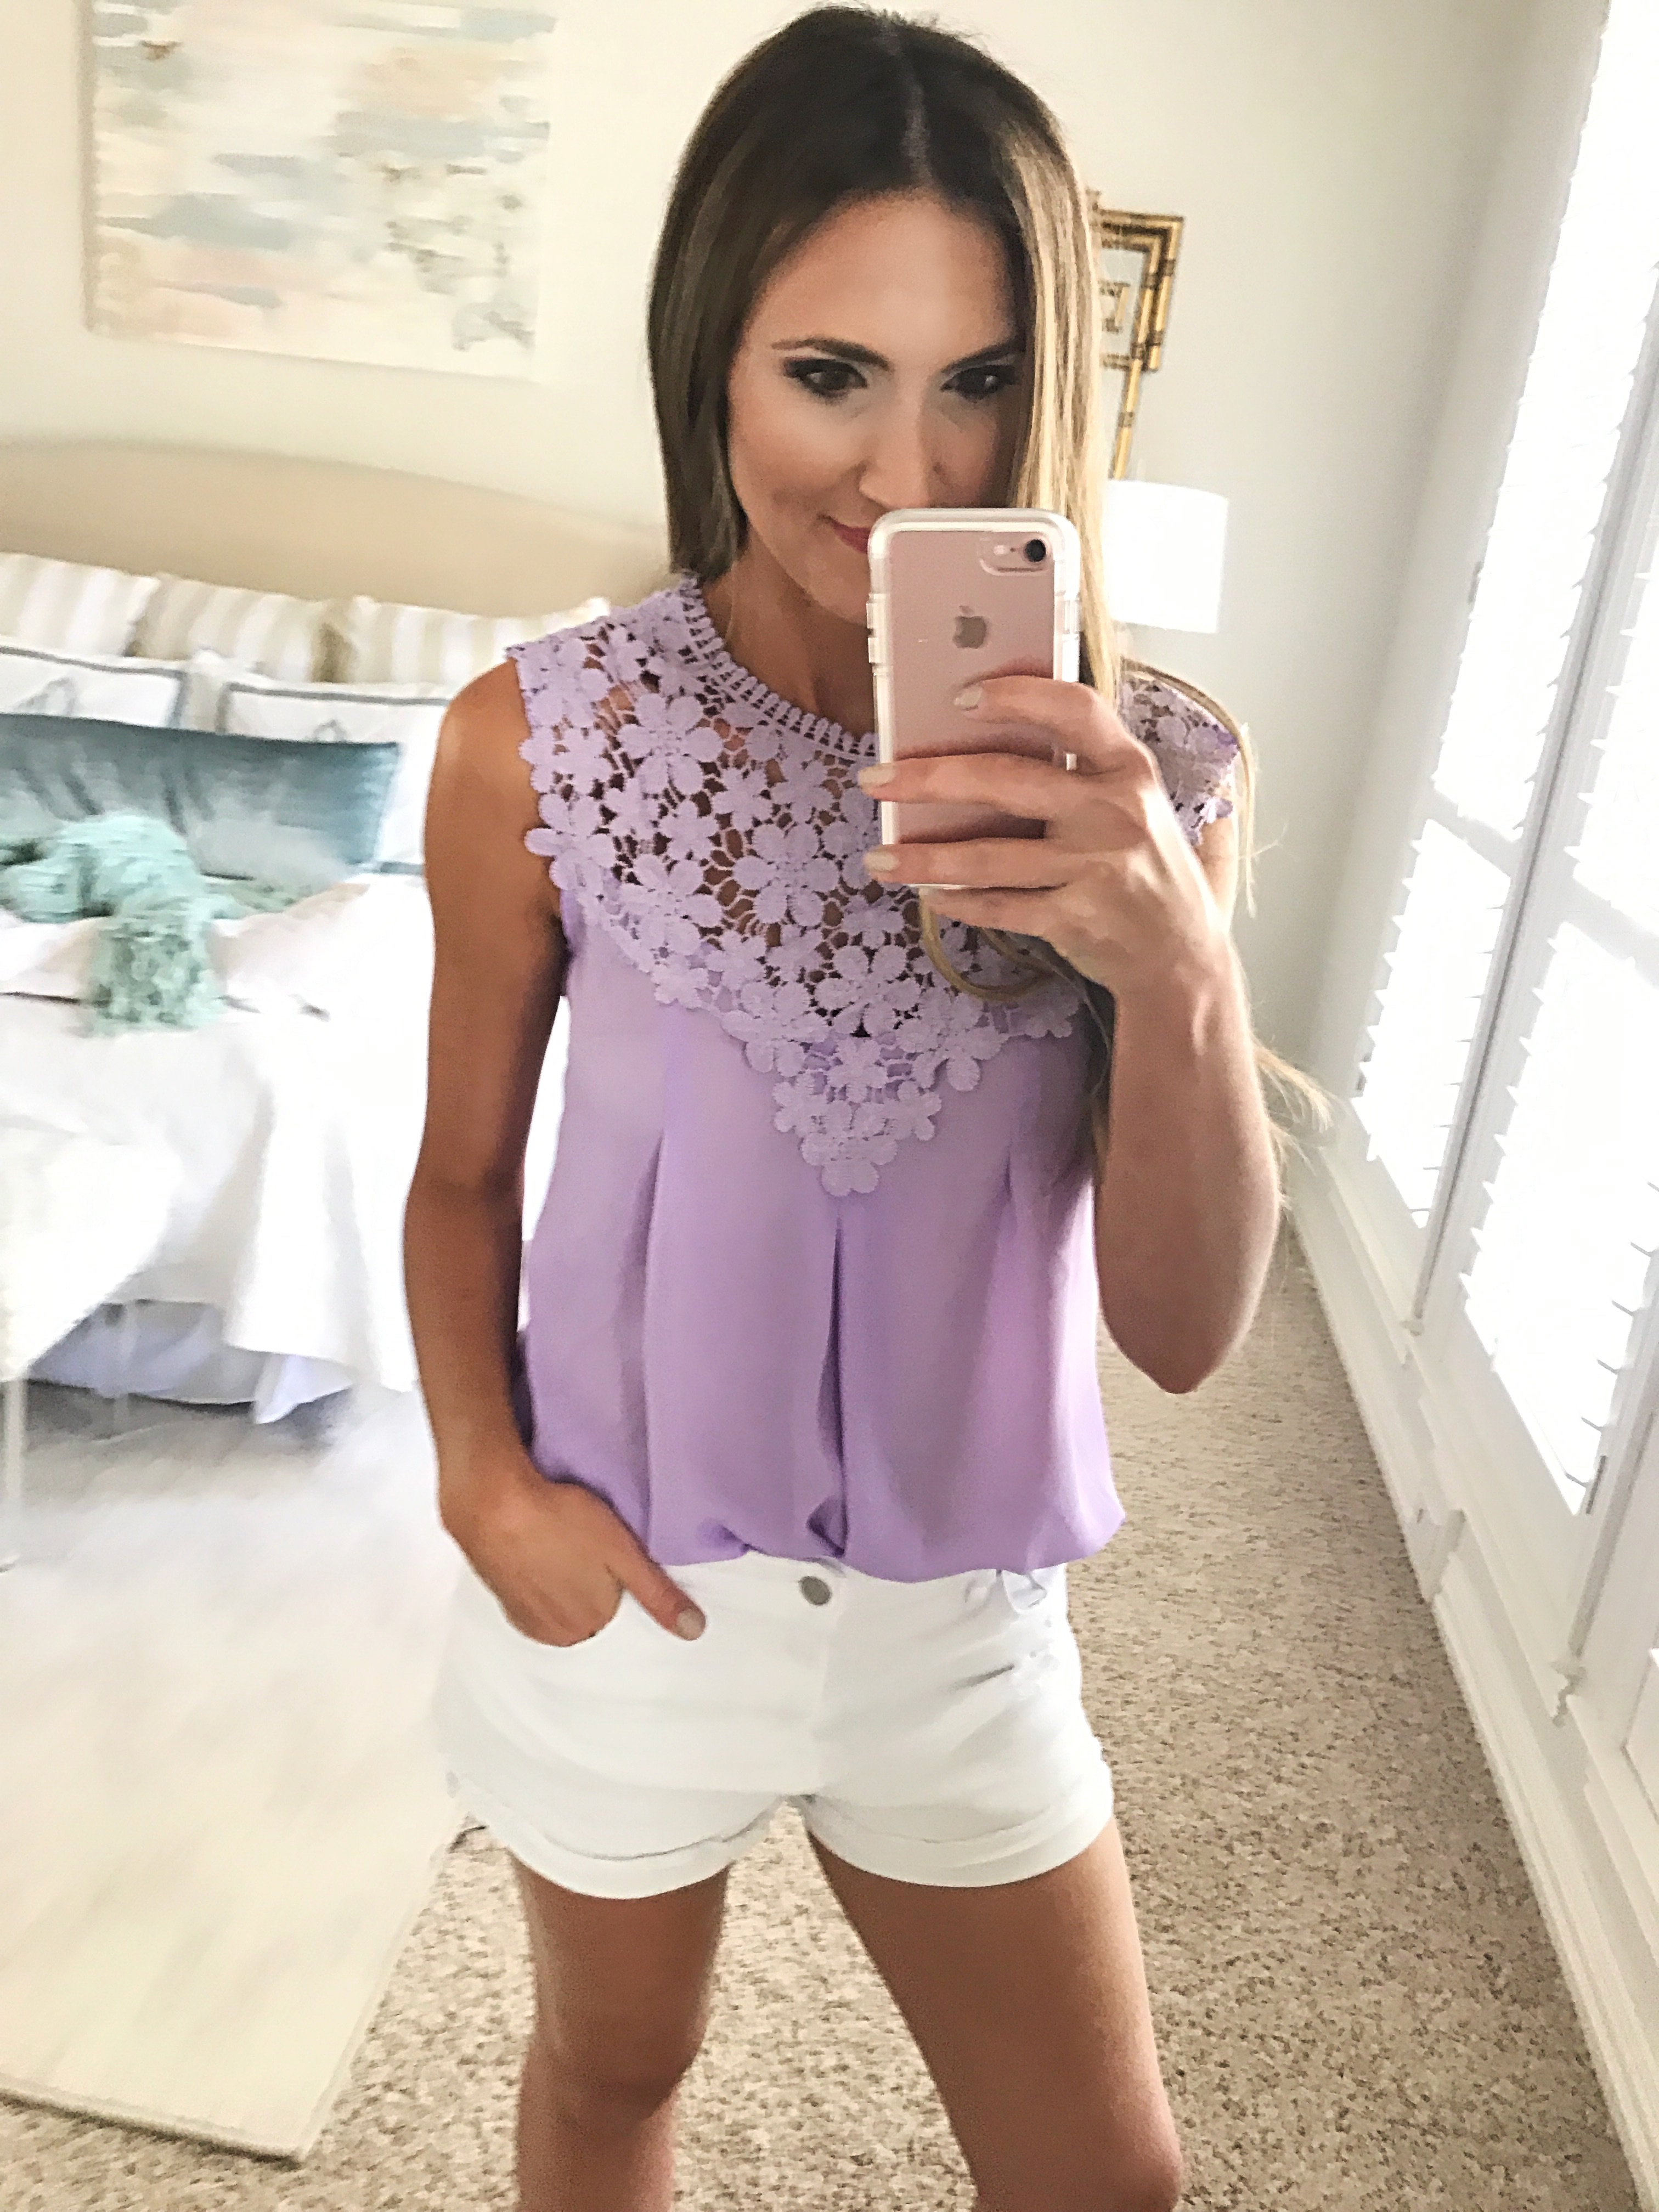 Amazon Prime Day Fashion Haul - Top 10 Most Purchased Items- JULY! featured by popular Dallas fashion blogger Style Your Senses